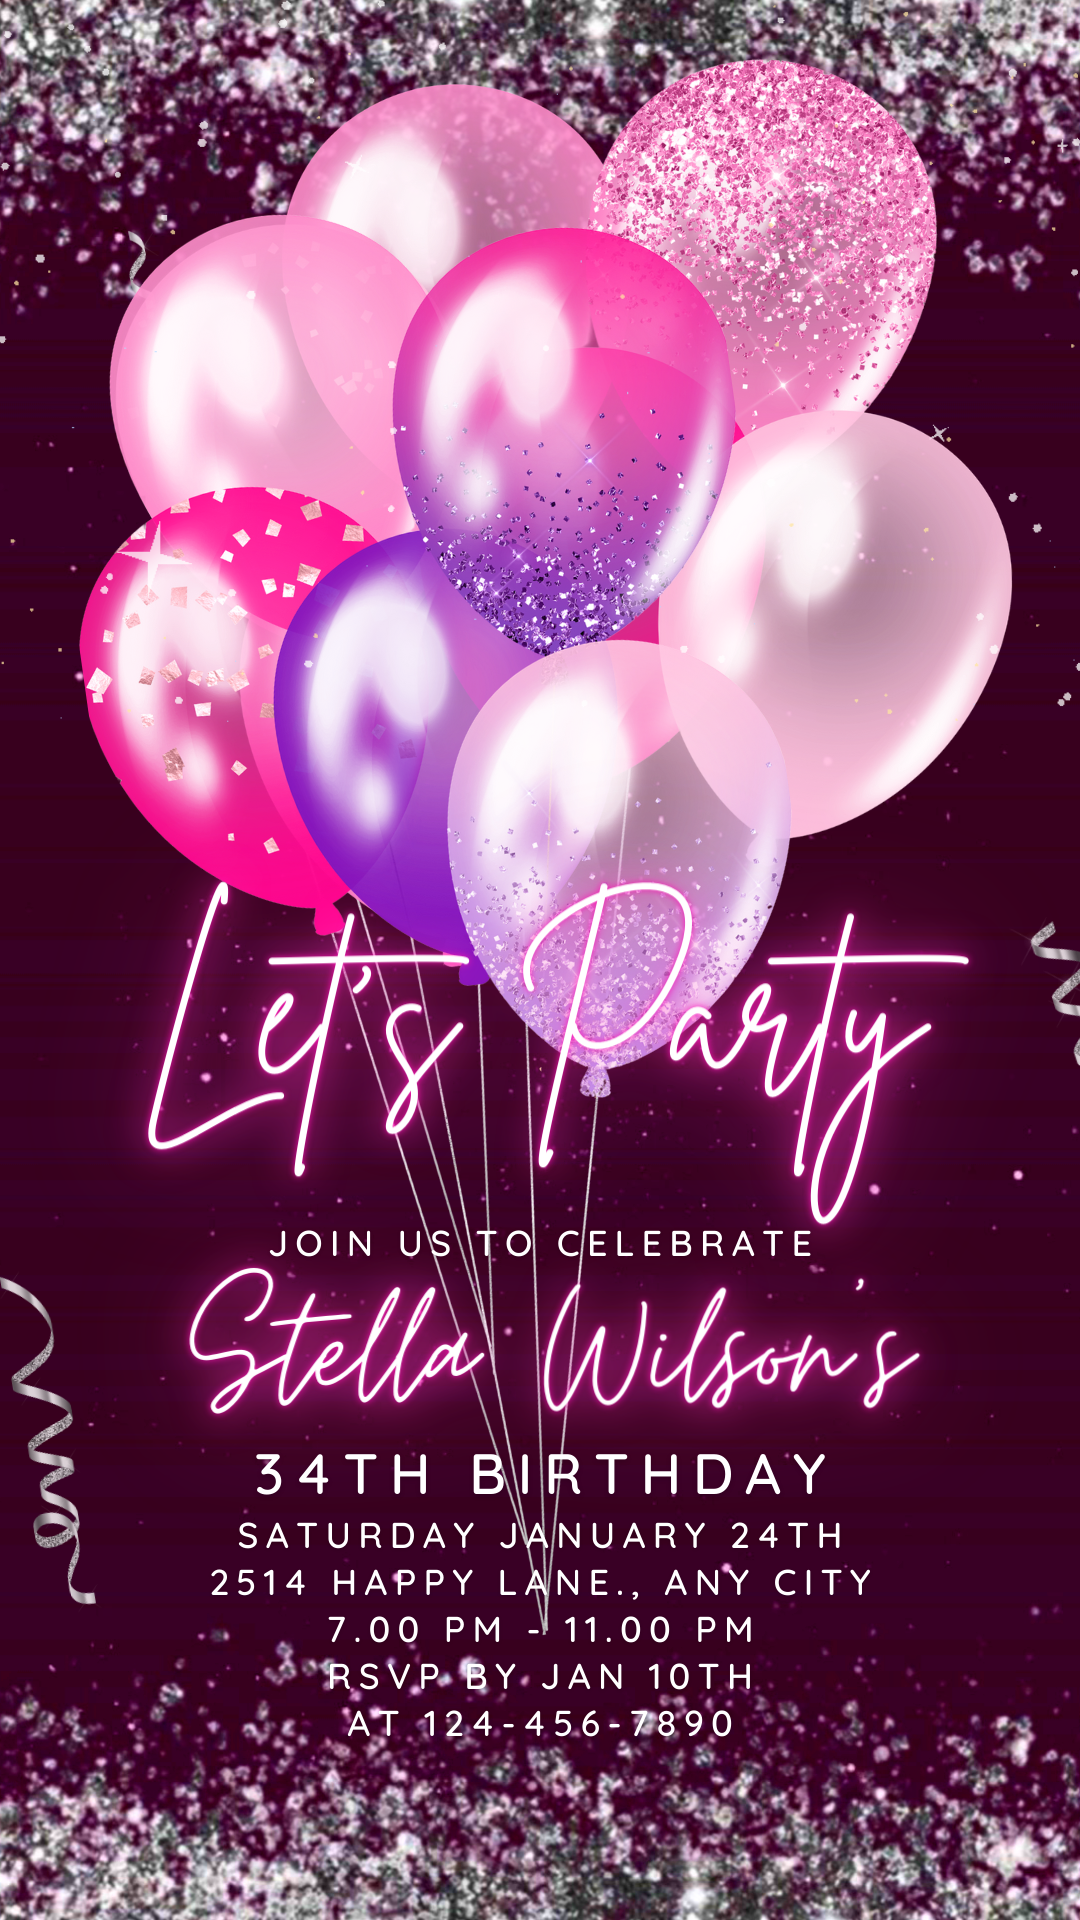 Let's Party Animated Invite for any Event Celebration, Editable Video Template, Birthday invitation for any Age | Hot Purple Pink E-vite